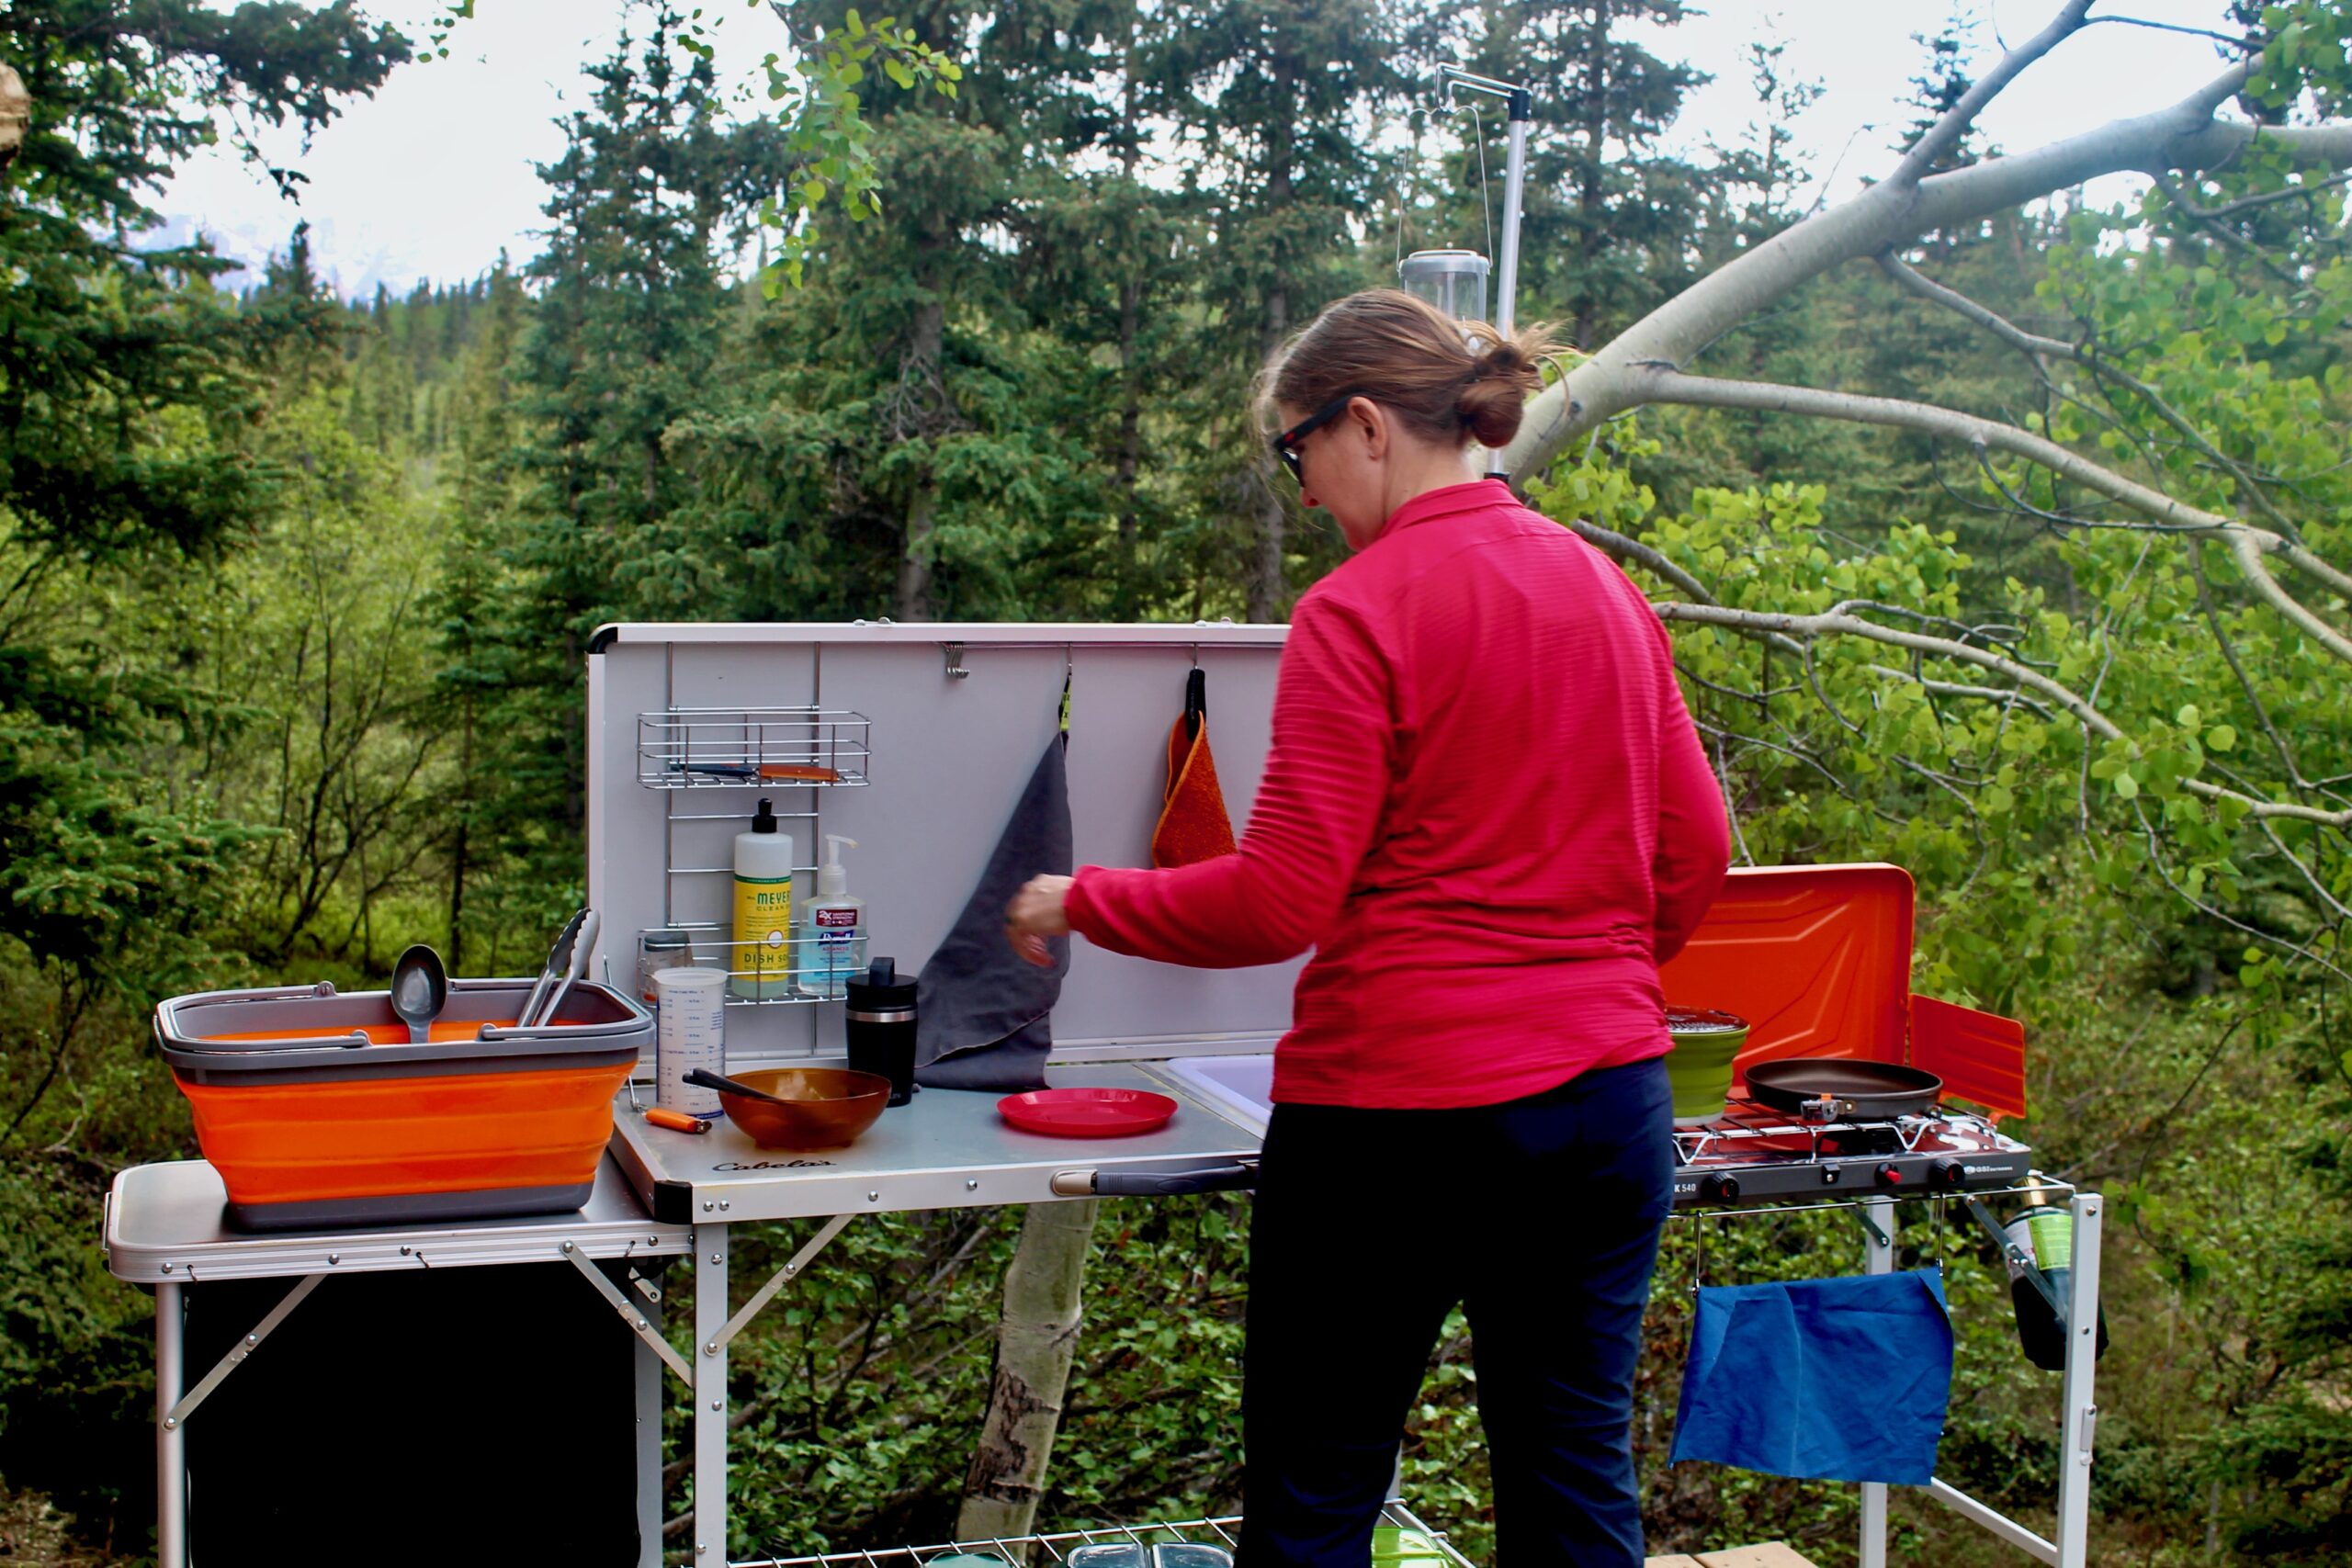 The Best Camp Kitchens of 2023